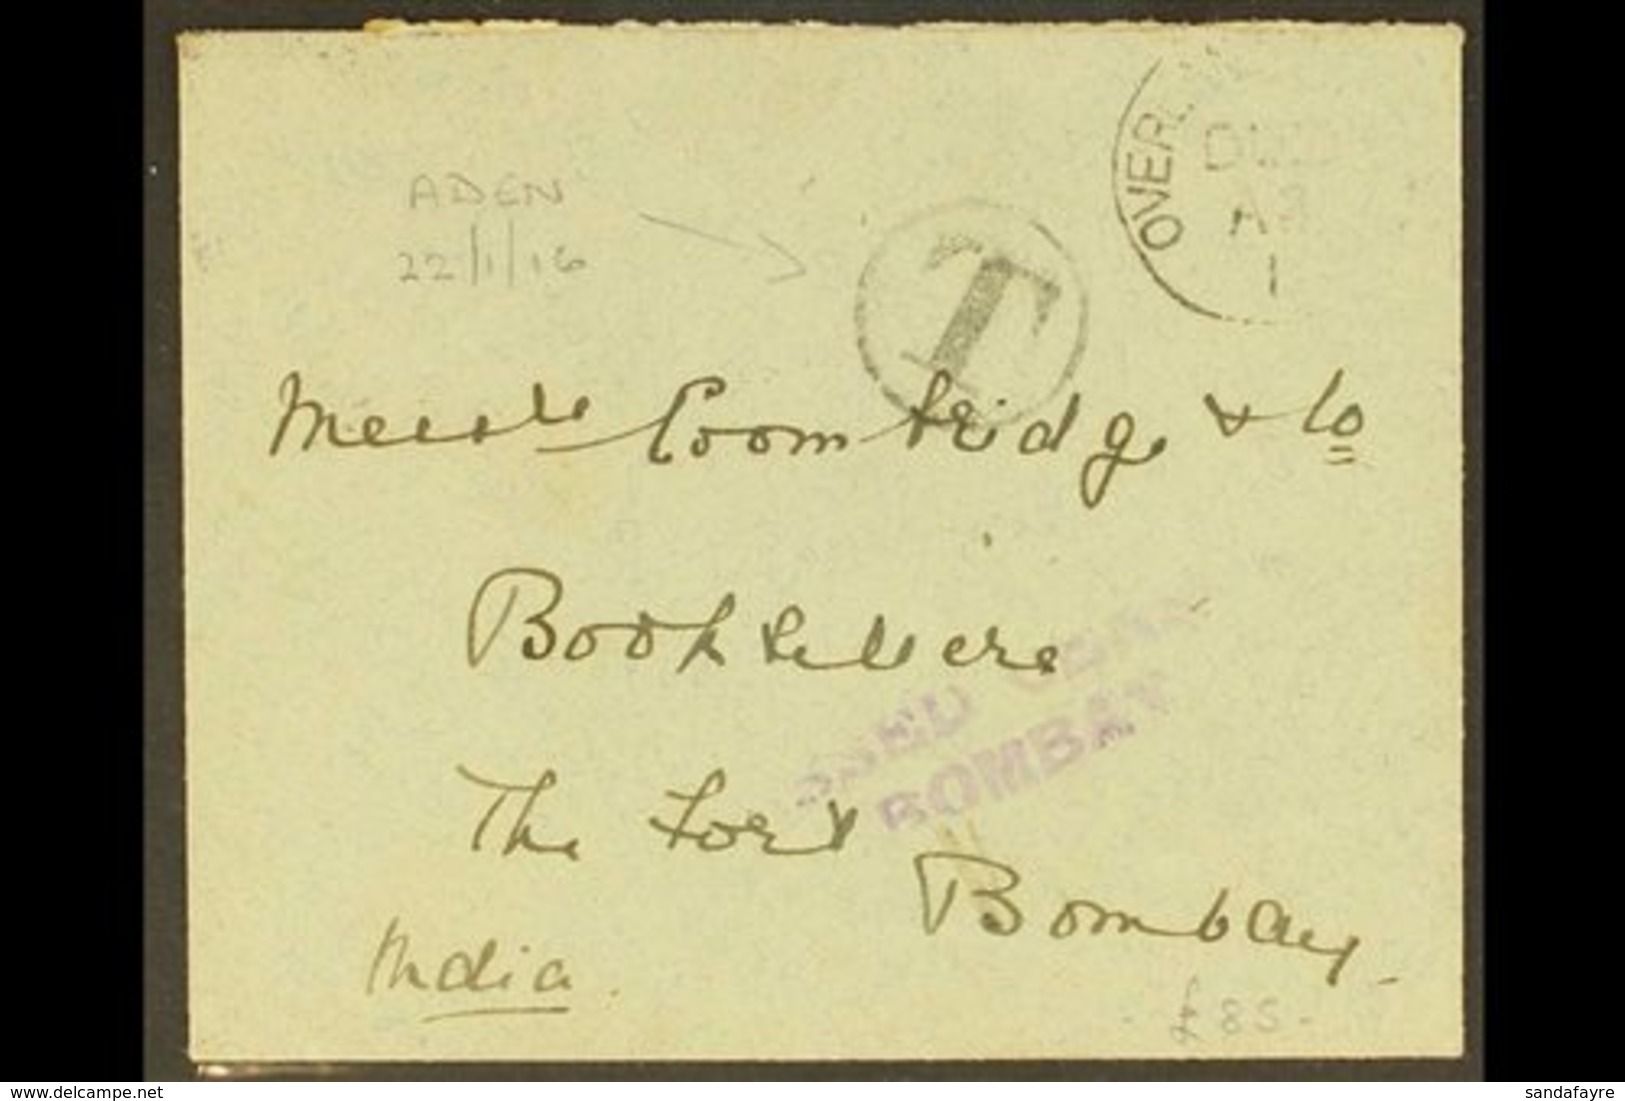 1916 CENSOR COVER (22 Jan) Aden To Bombay Stampless Envelope With Tax Mark Plus "OVERLAND POSTAGE DUE" Handstamp, Alongs - Aden (1854-1963)